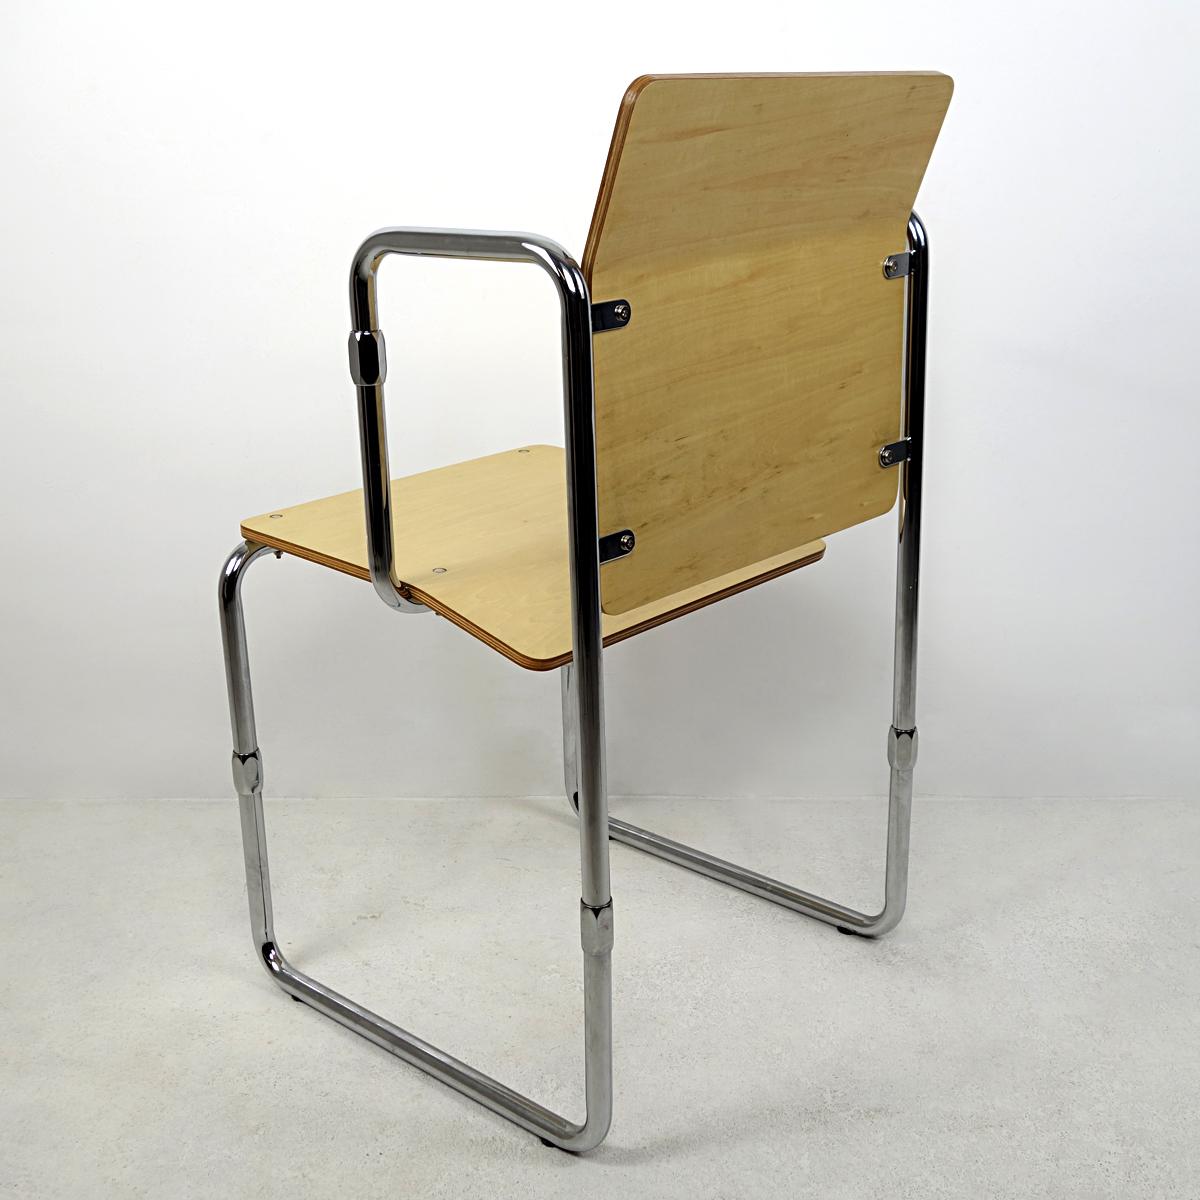 Dutch Modernist Hopmi Chair by Gerrit Rietveld Limited Edition Official Reproduction